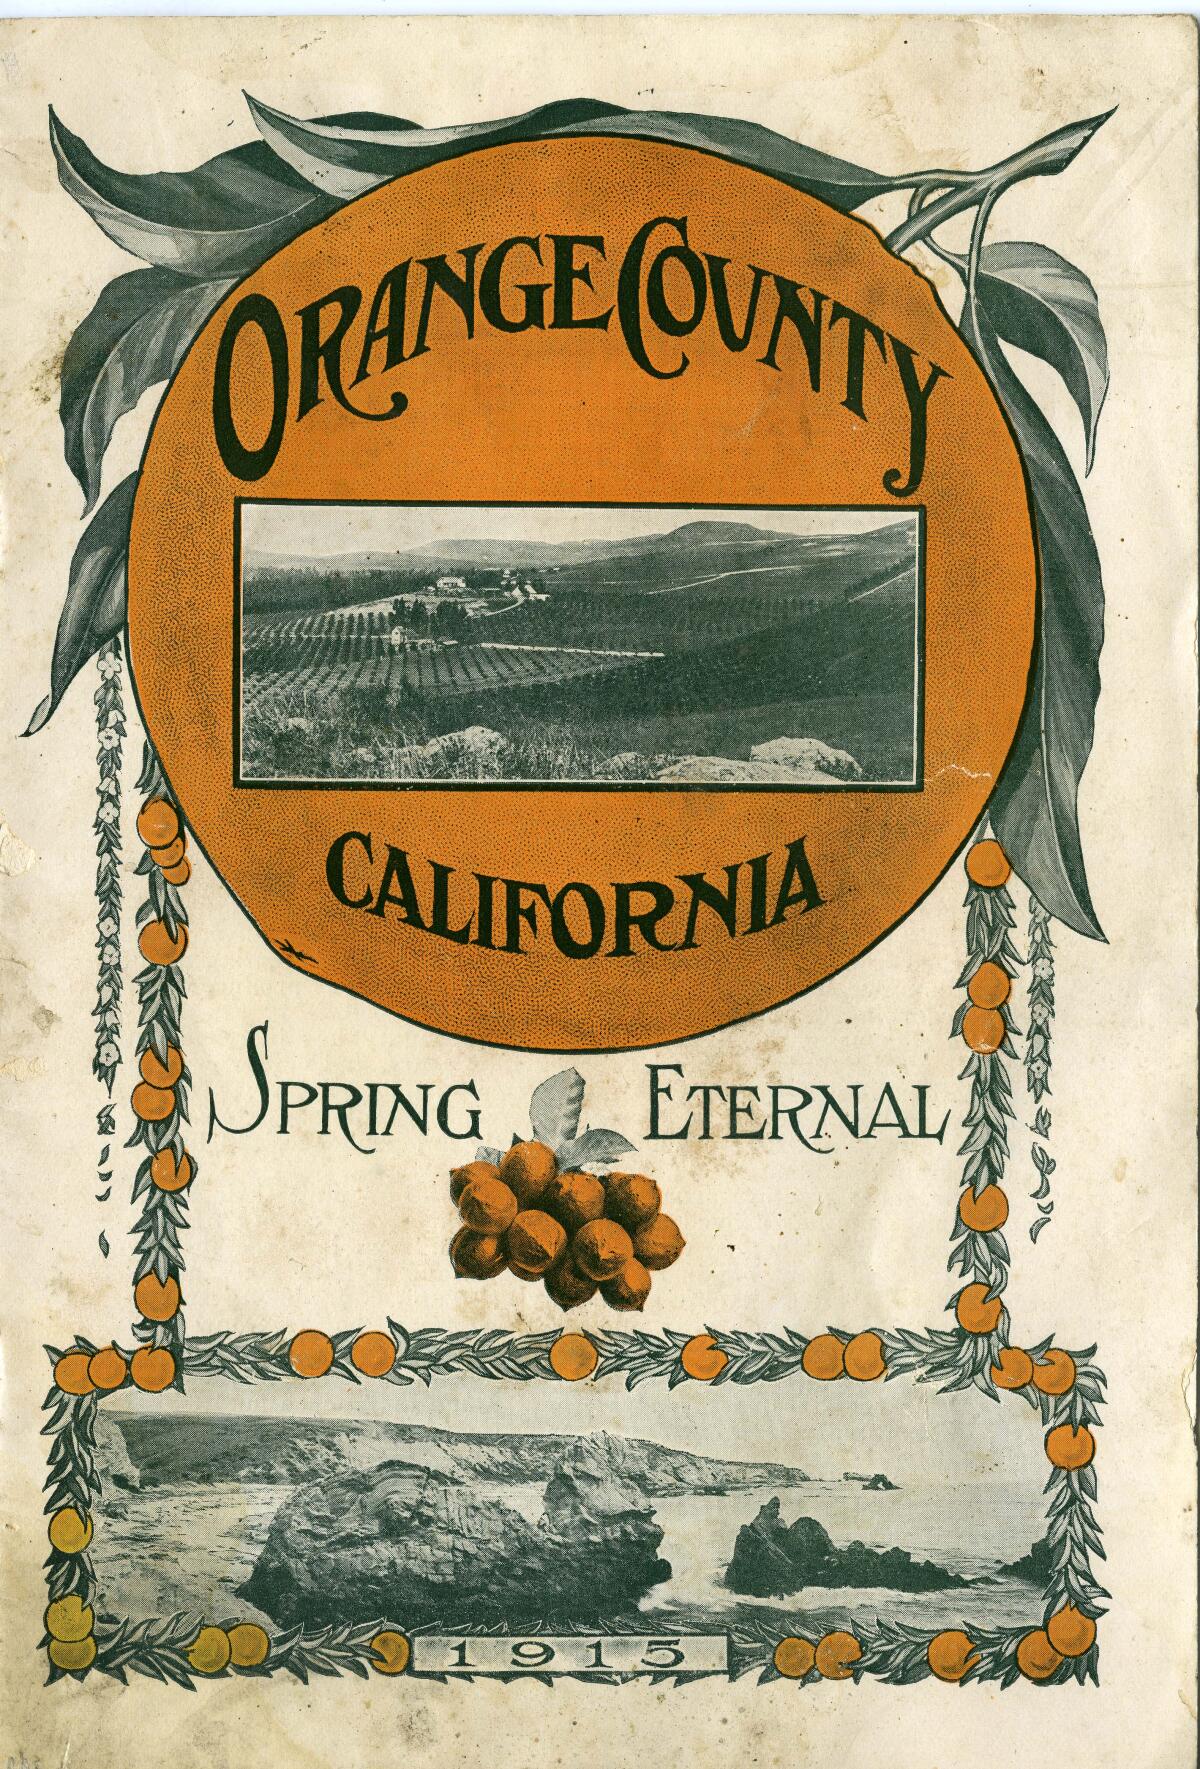 One of the pieces included in the exhibit that describes Orange County as being "Spring Eternal." It dates back to 1915.